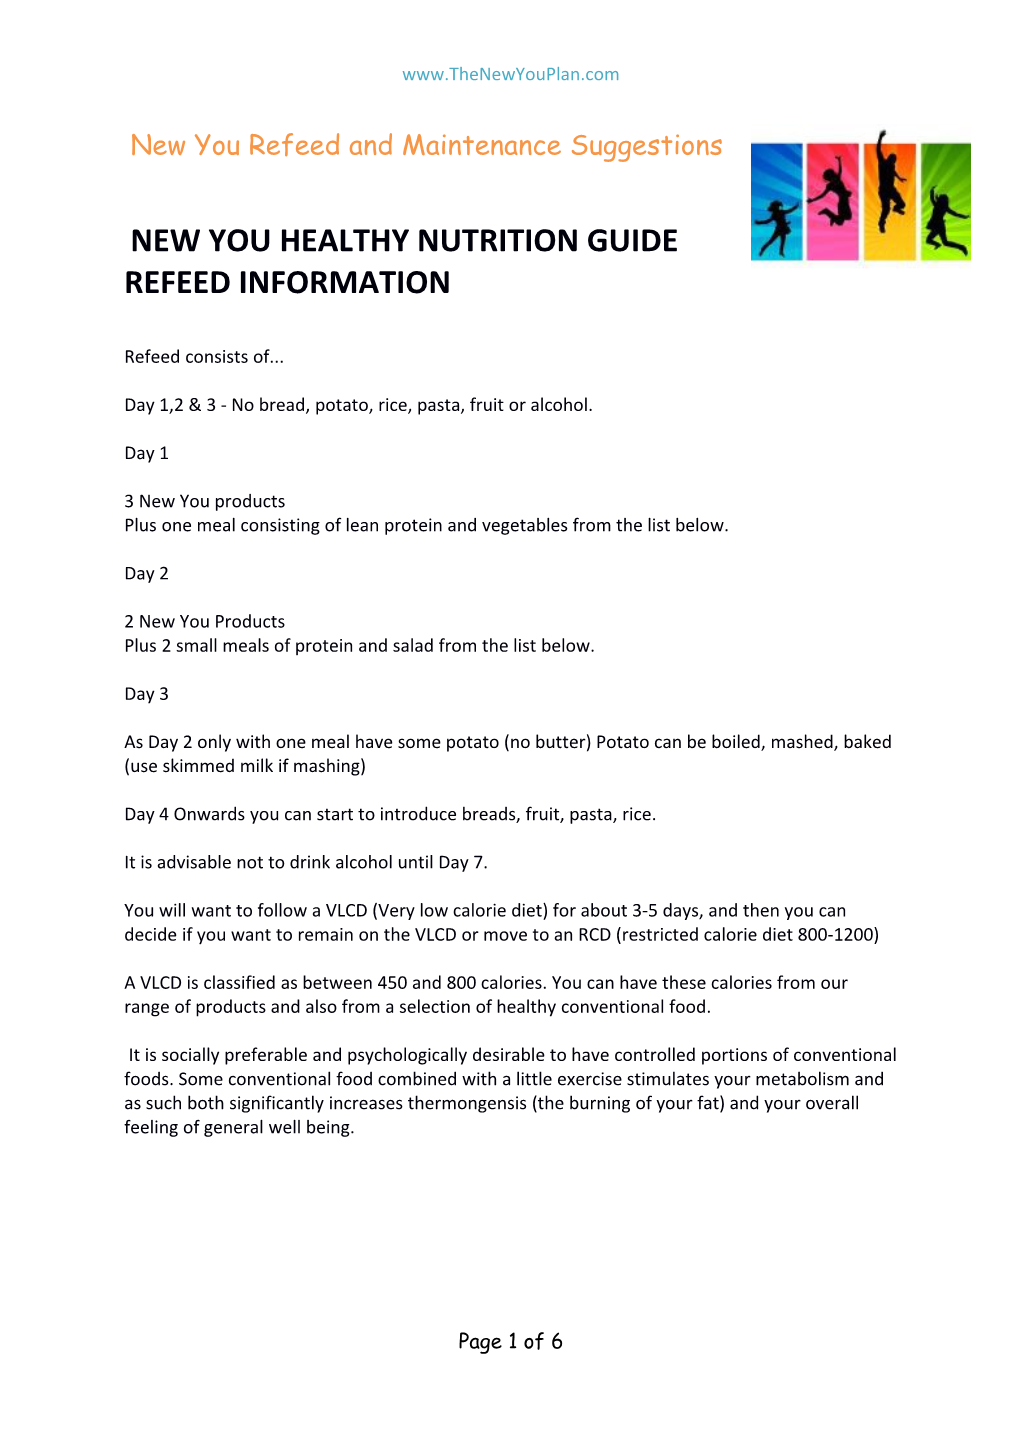 New You Healthy Nutrition Guide